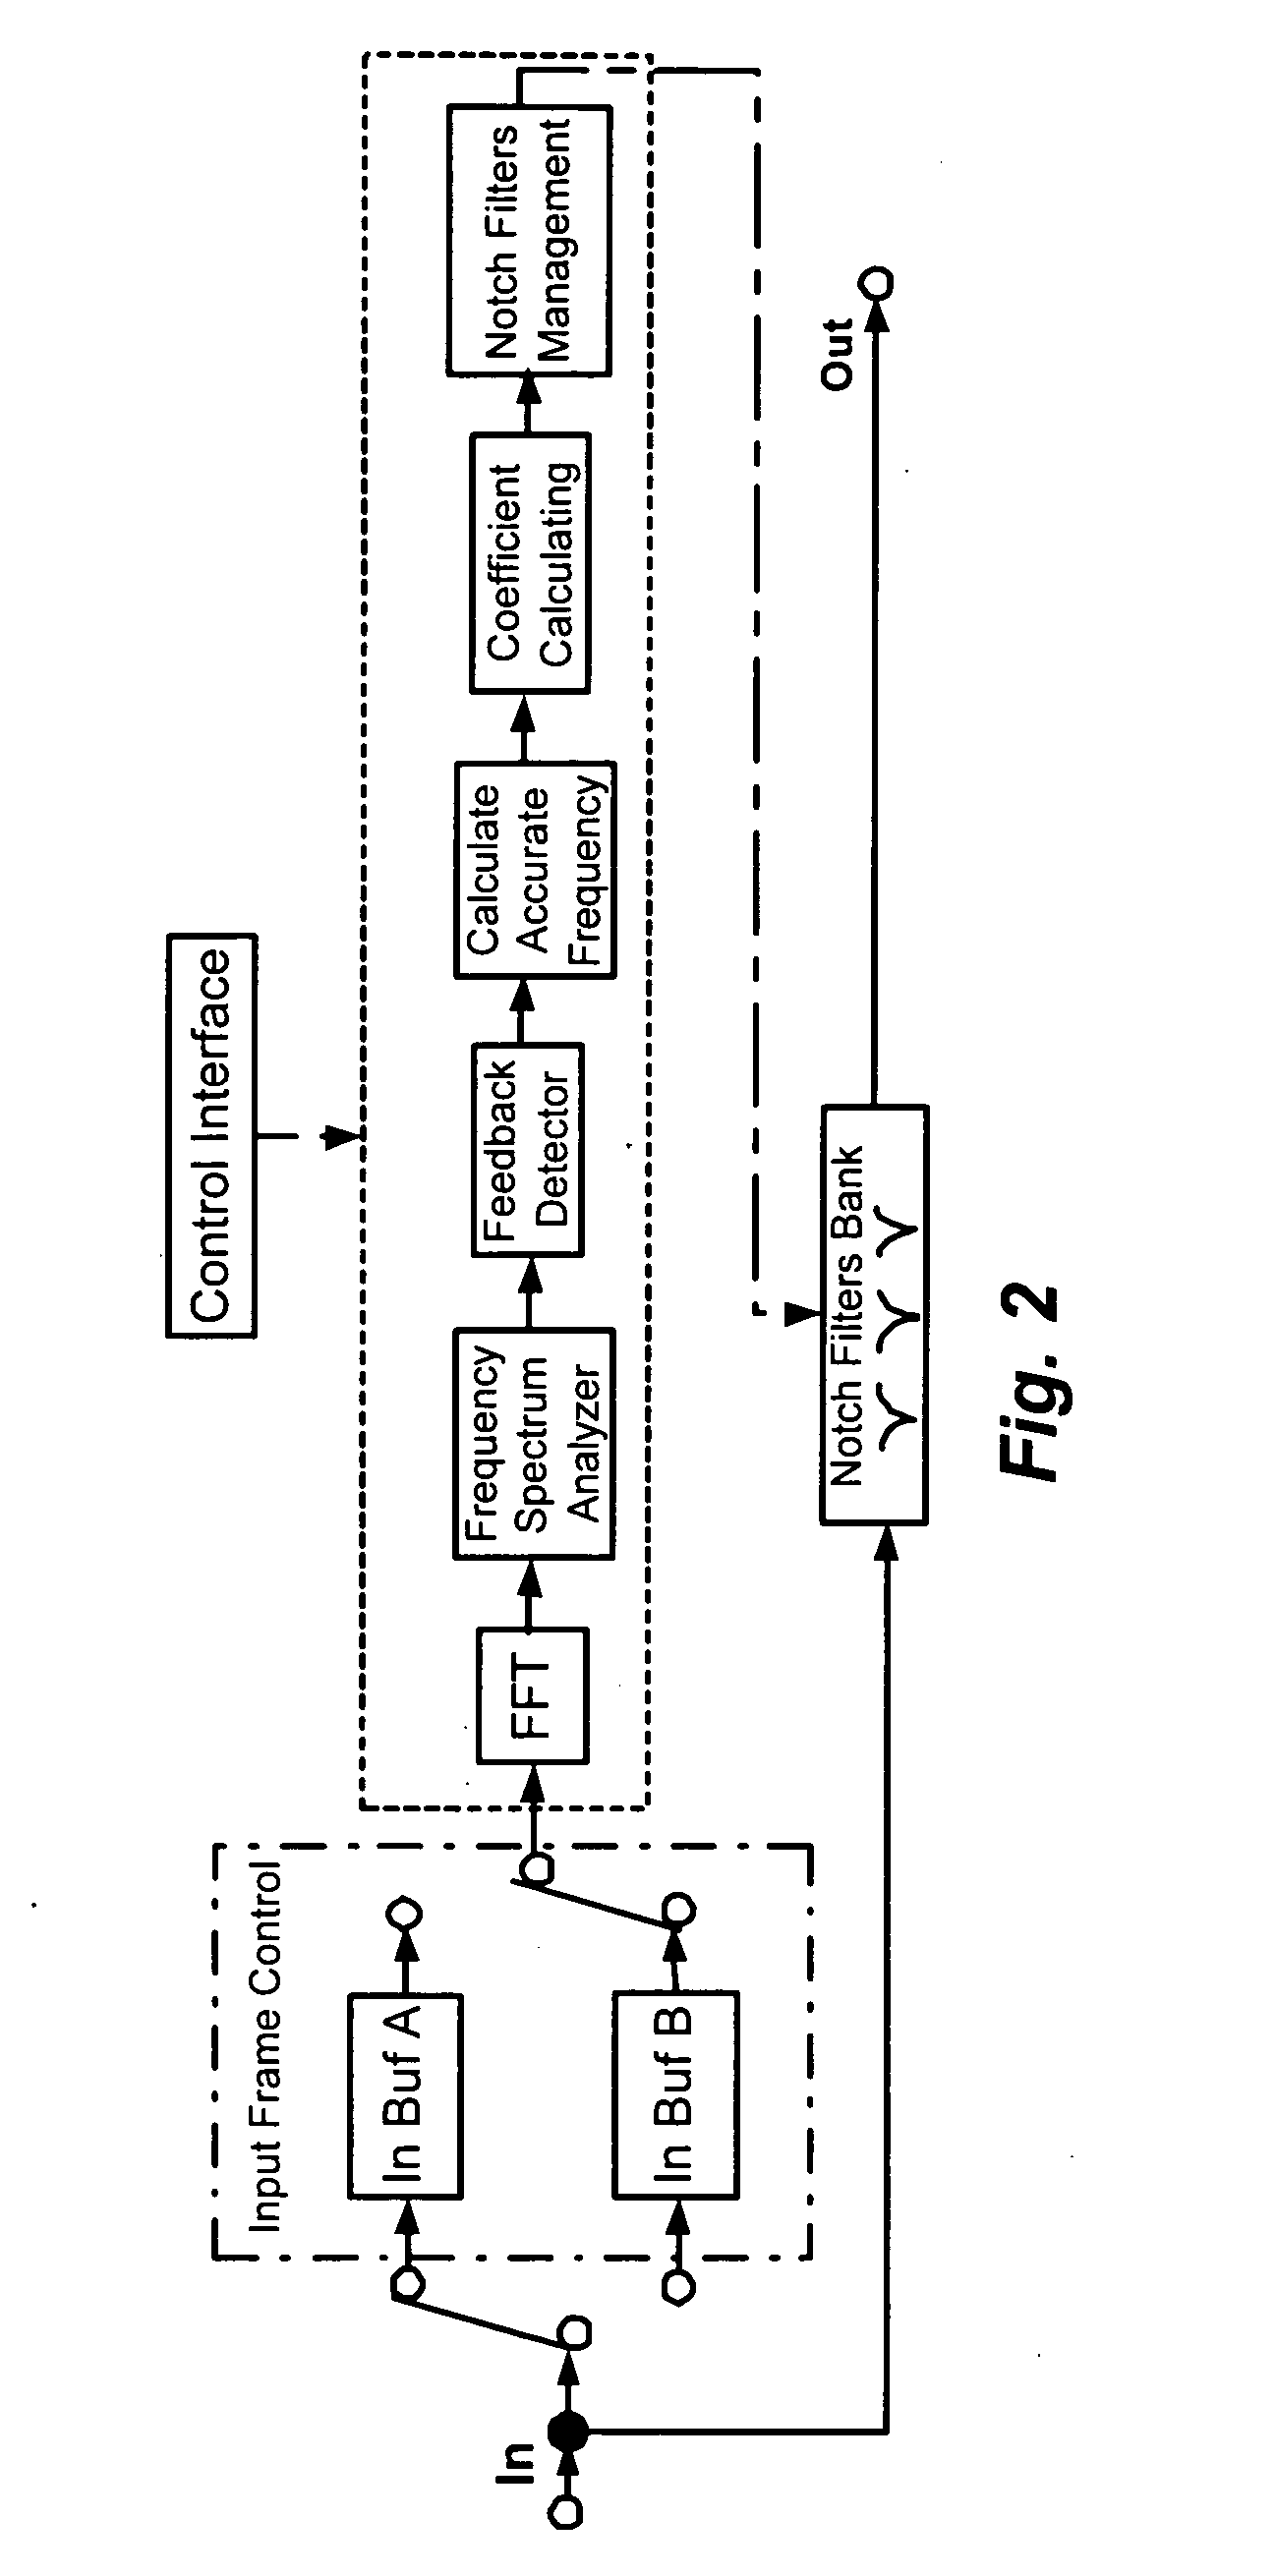 Acoustic feedback suppression for audio amplification systems